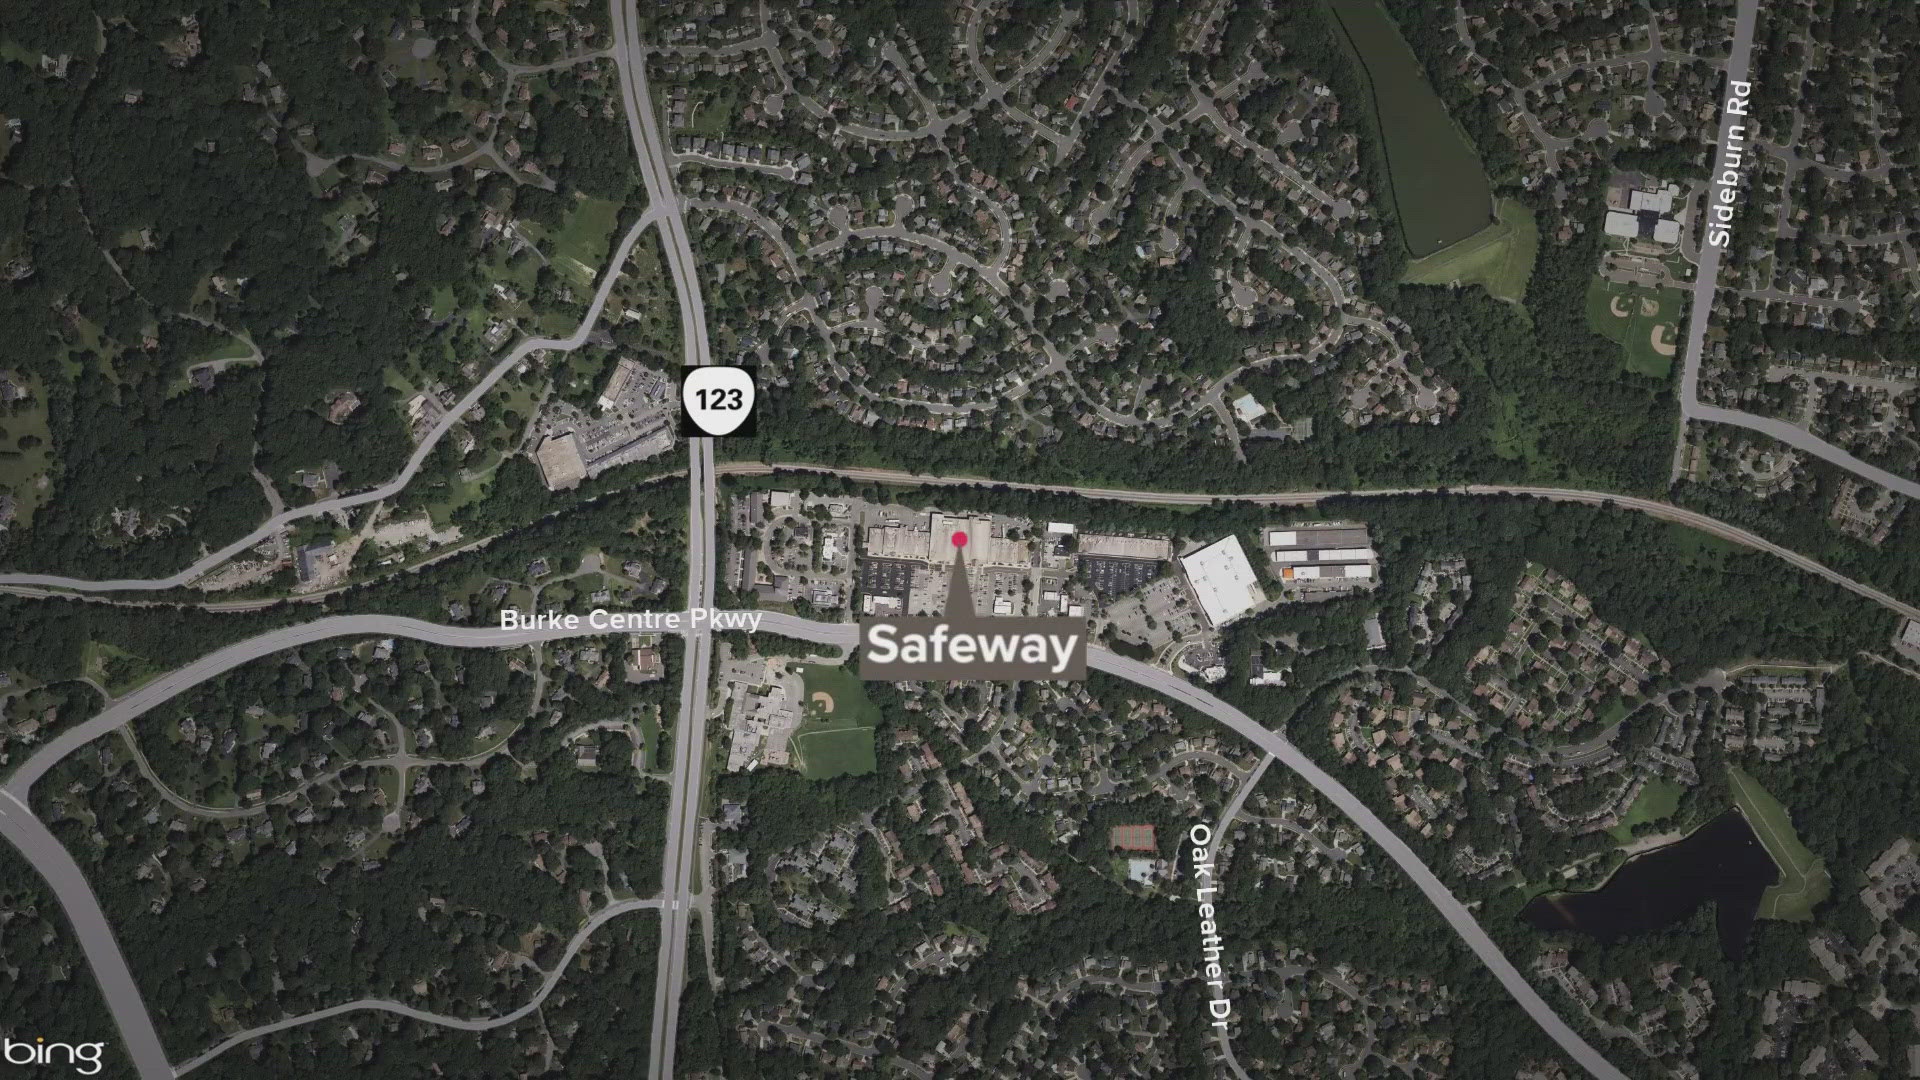 On May 18, detectives responded to the Safeway along Burke Centre Parkway, where the group had just left with an undisclosed amount of medication.